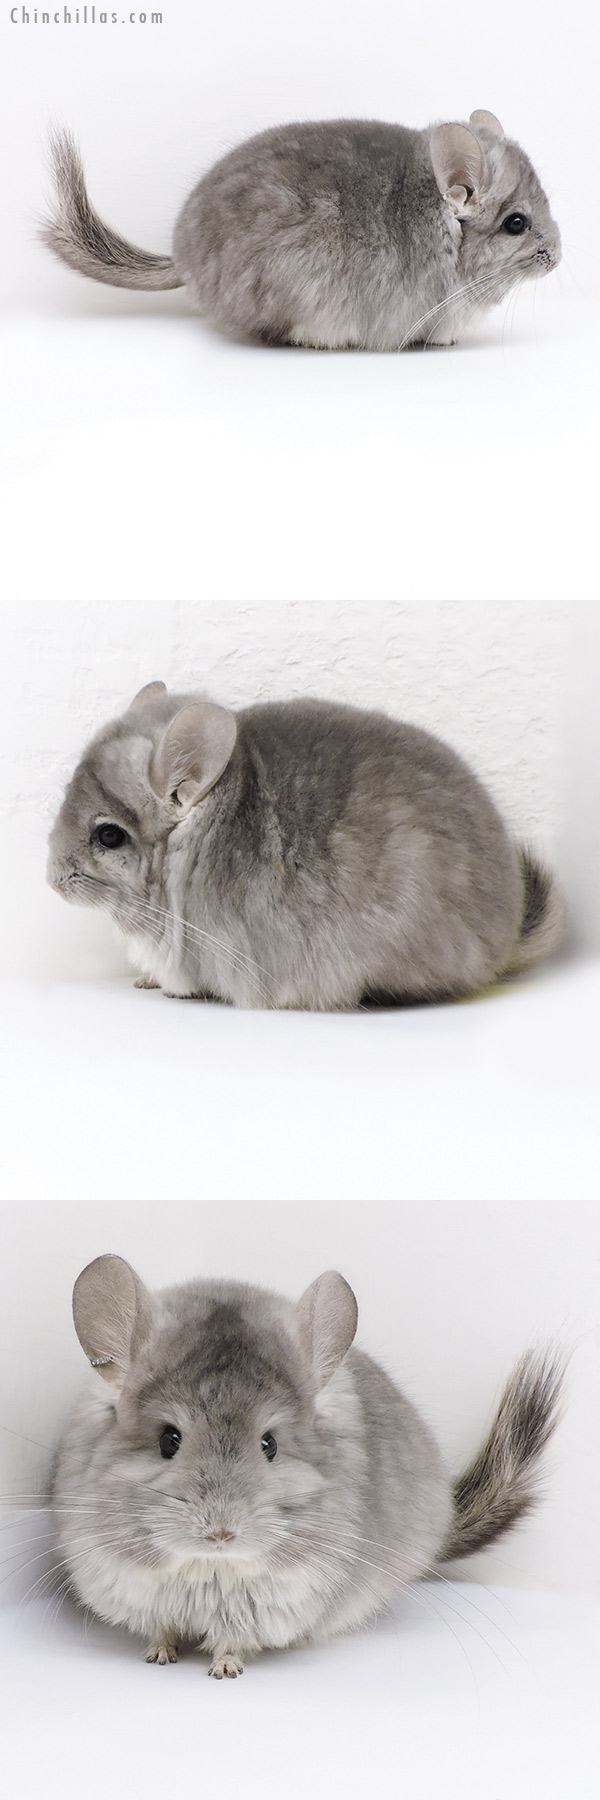 Chinchilla or related item offered for sale or export on Chinchillas.com - 18027 Violet  Royal Persian Angora Male Chinchilla